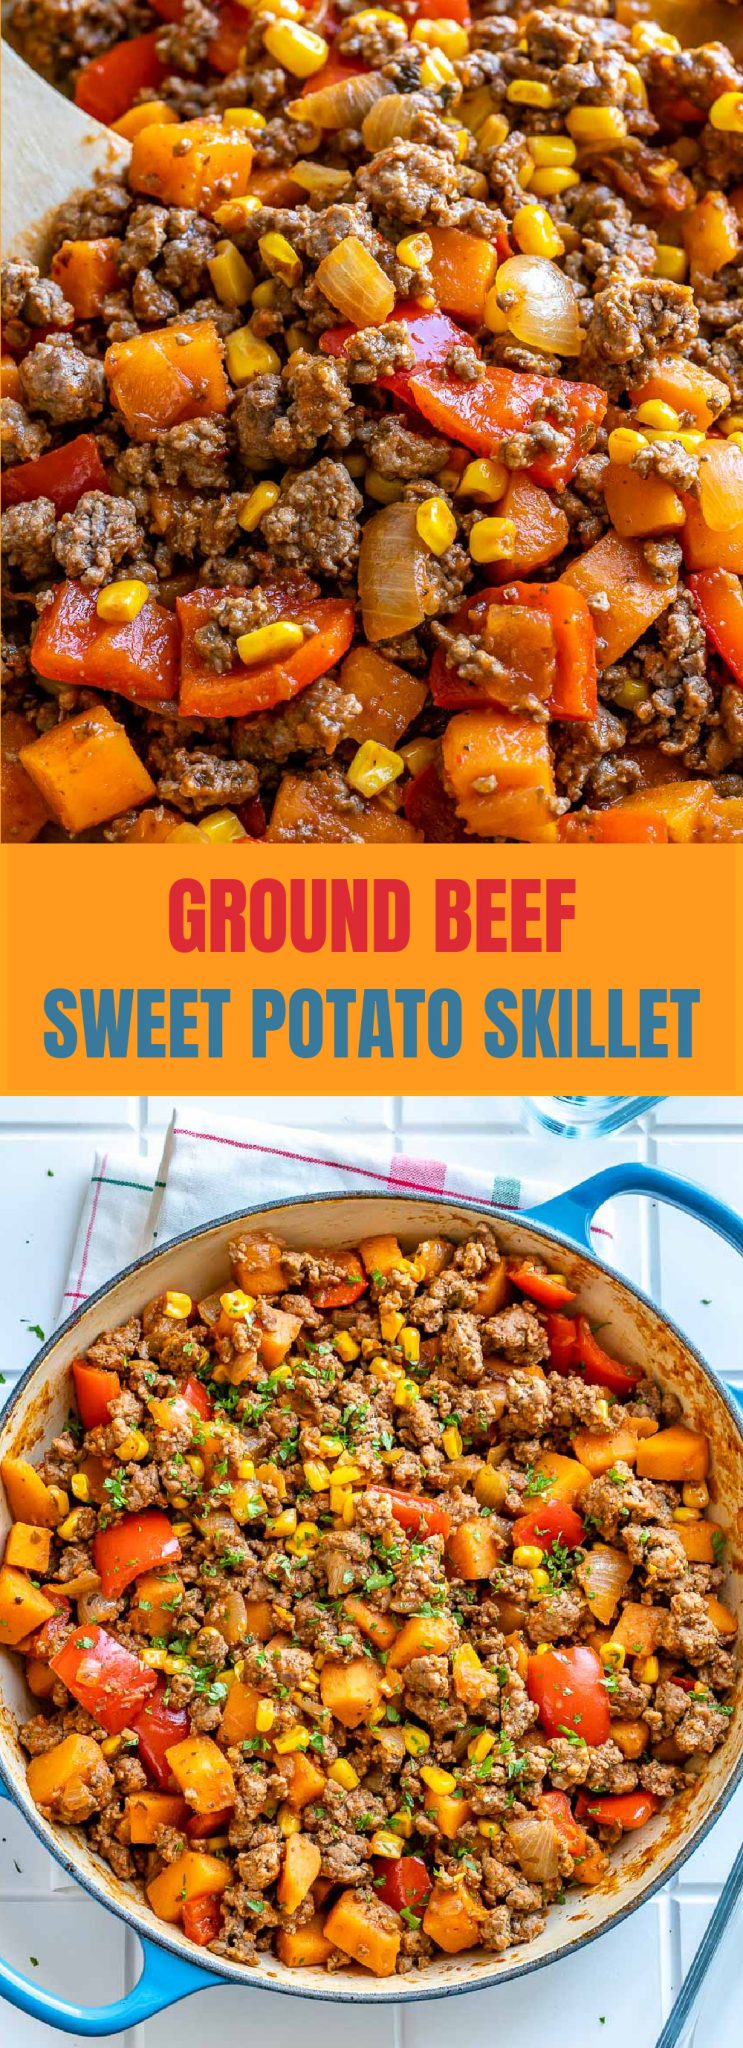 https://cleanfoodcrush.com/wp-content/uploads/2020/10/Simple-Ground-Beef-Sweet-Potato-Skillet-Recipe-Clean-Food-Crush-scaled.jpg